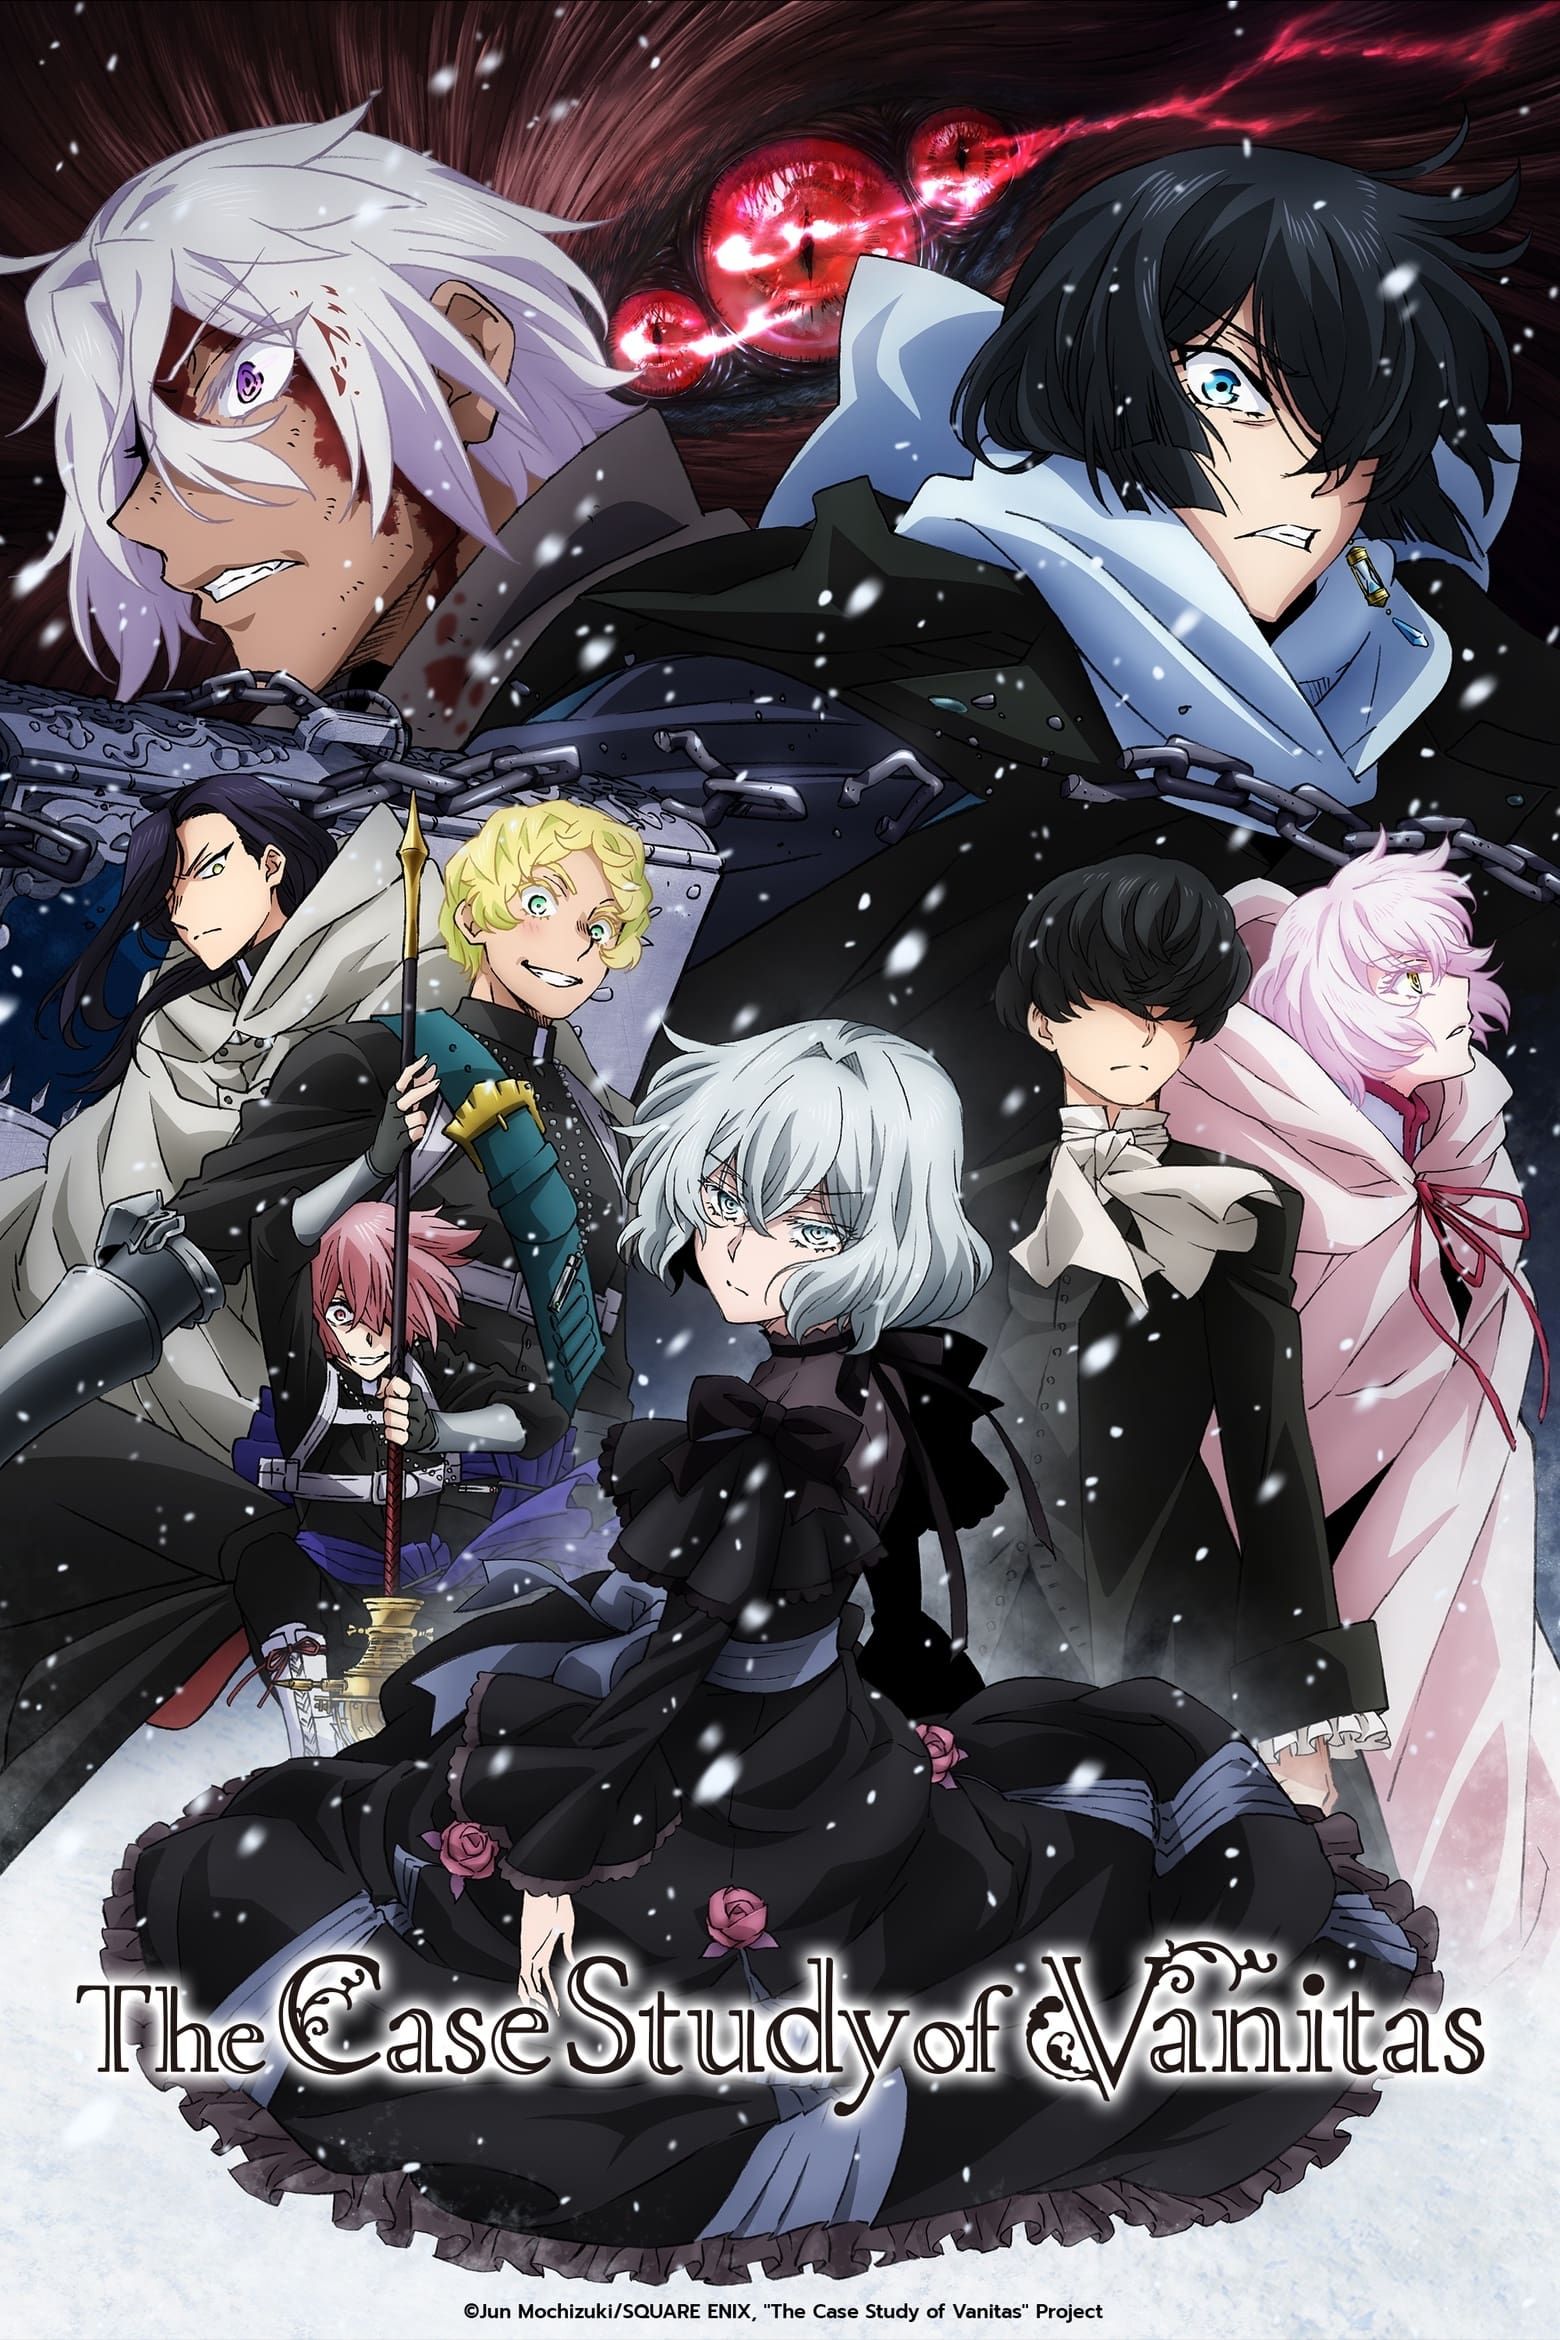 Bungo Stray Dogs' free live stream: How to watch online without cable 